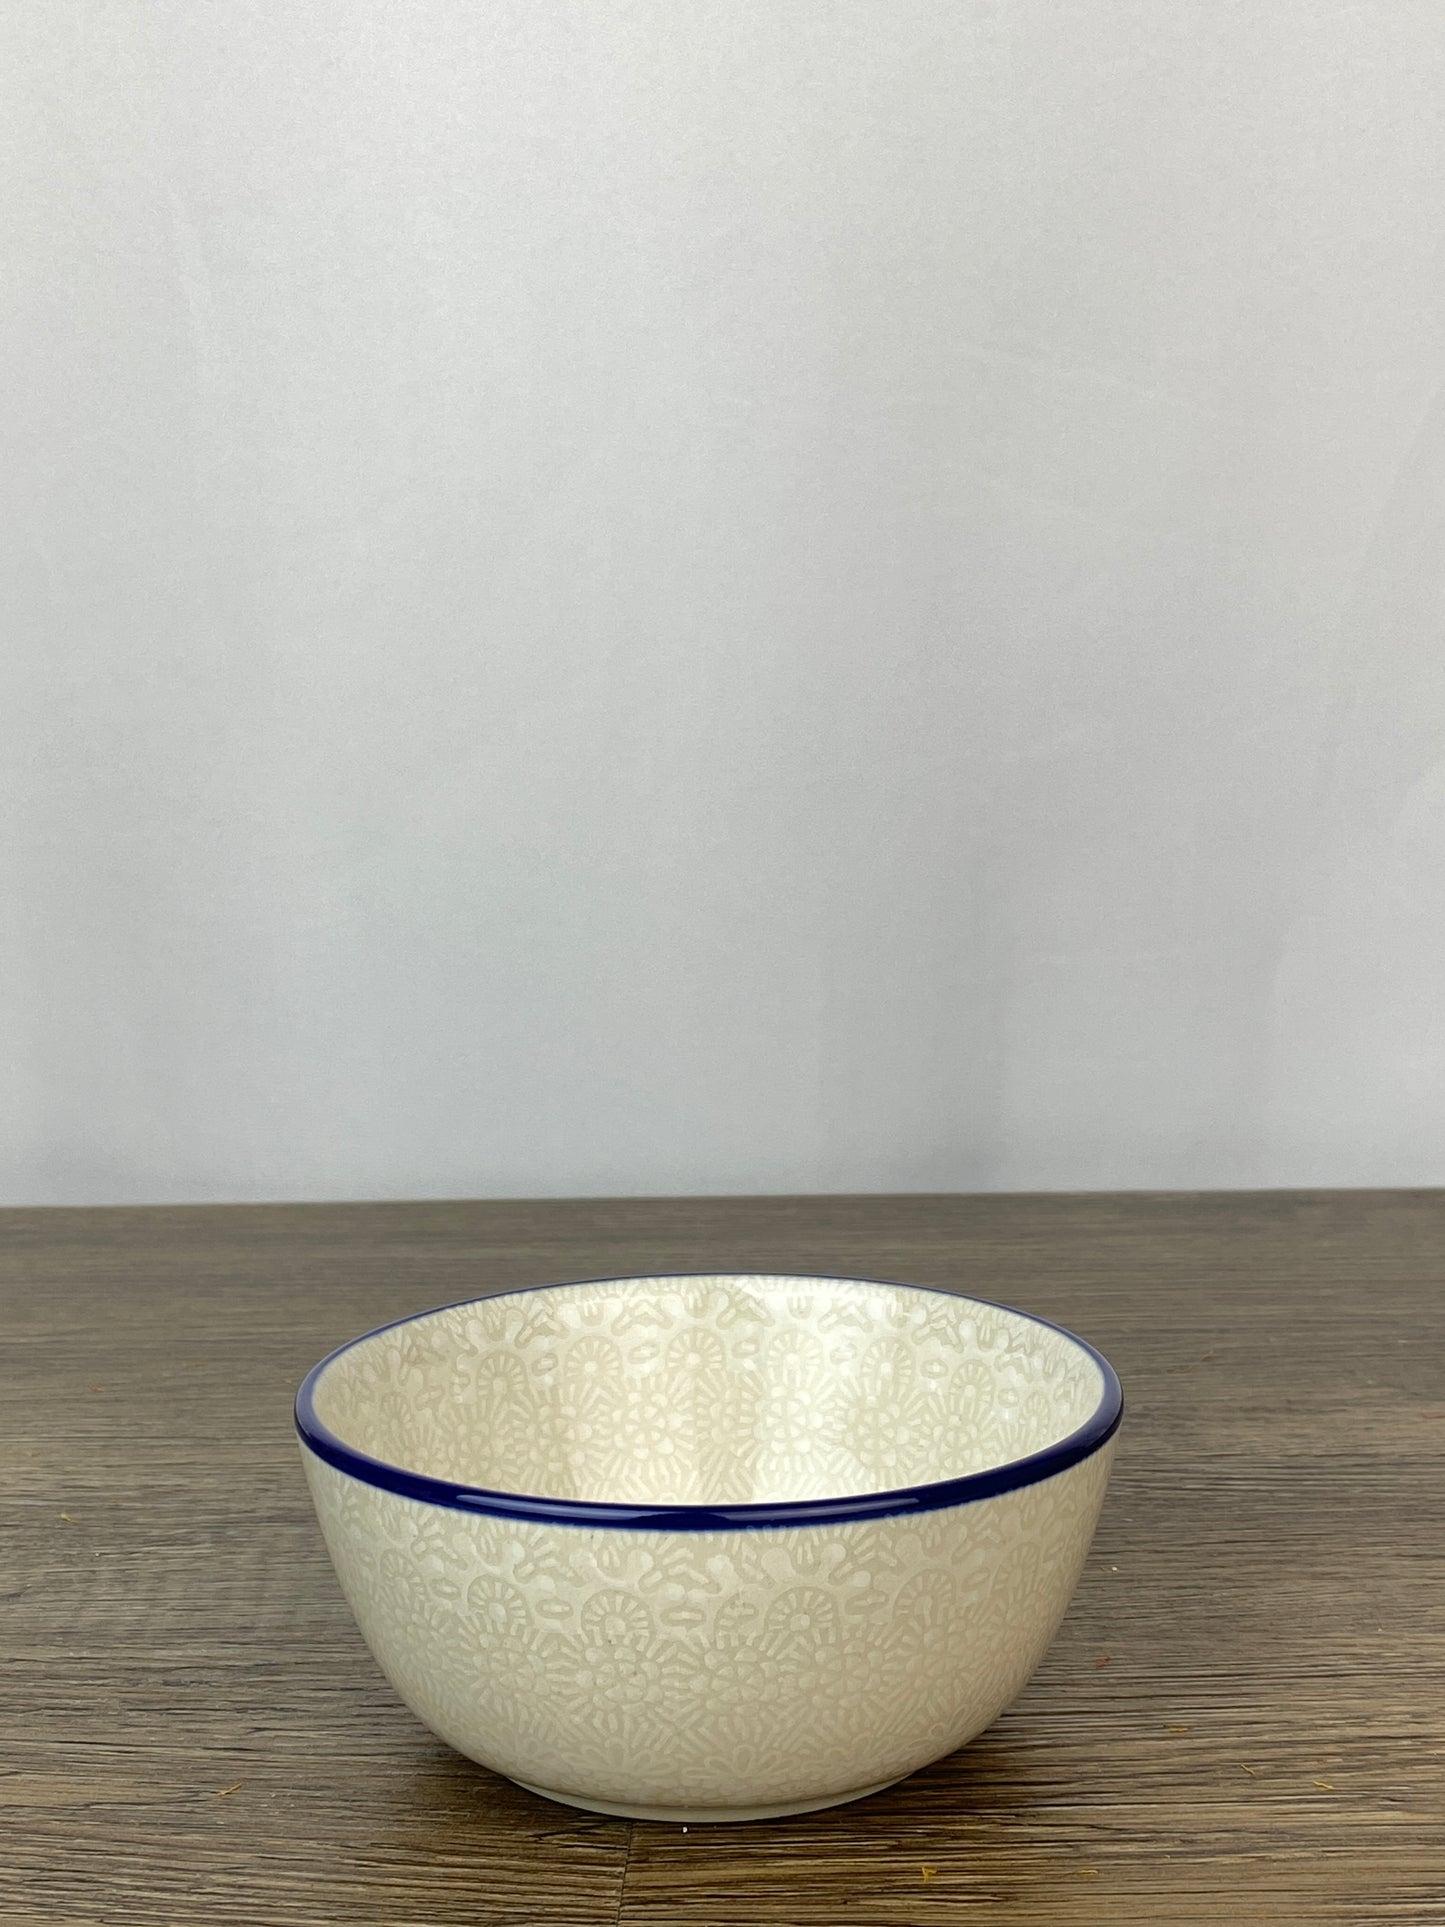 Small Cereal / Dessert Bowl - Shape 17 - Pattern 2324